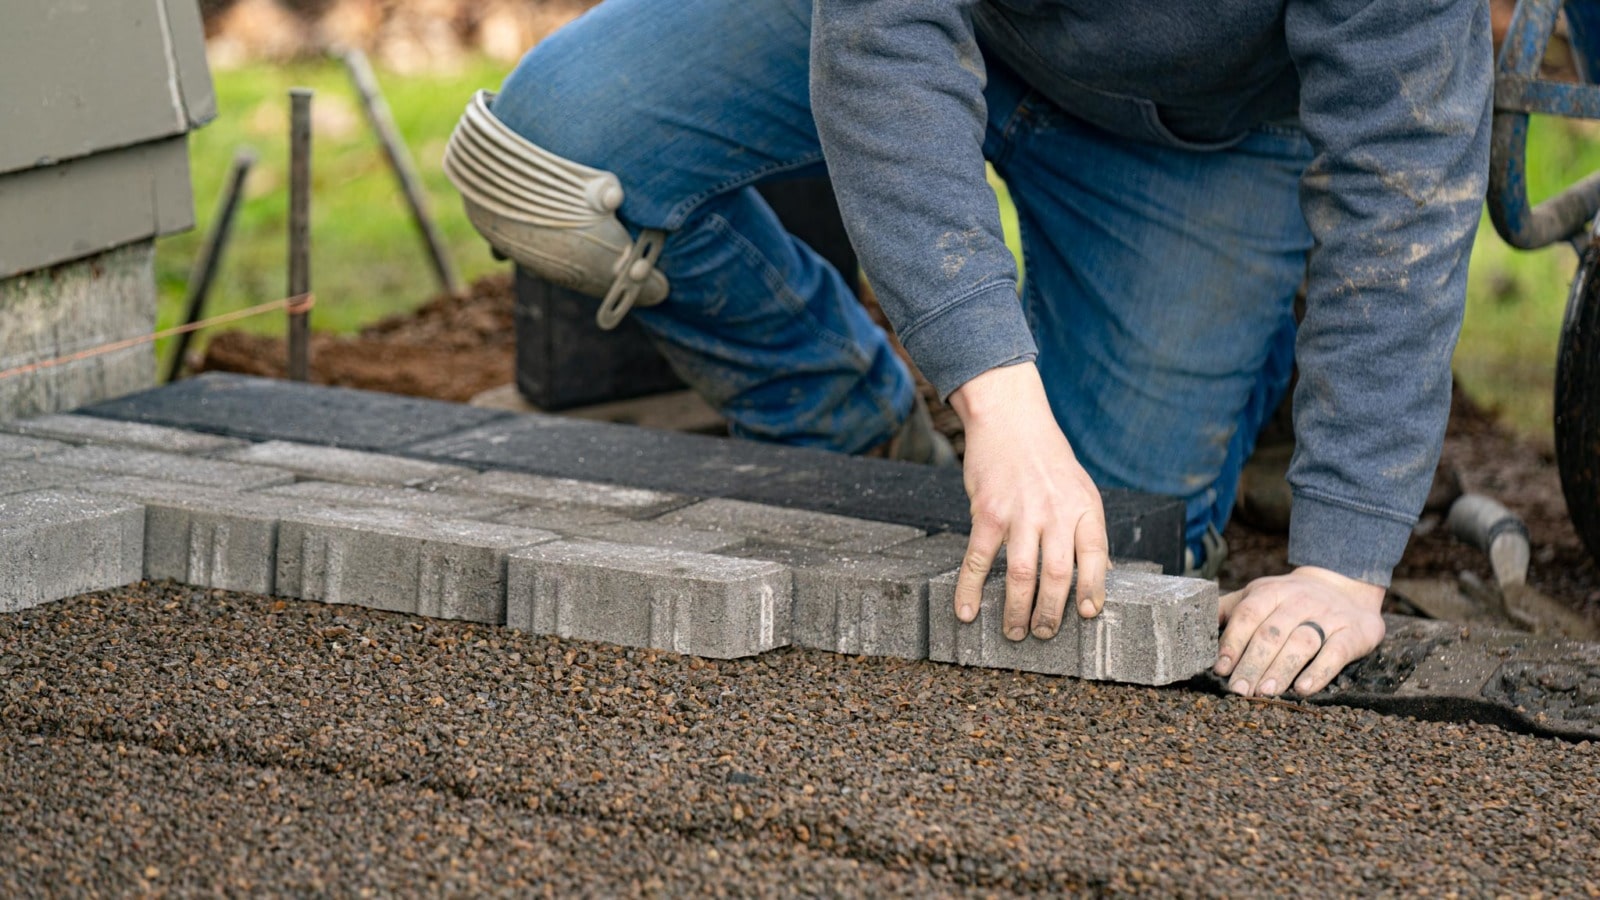 How To Level For Pavers What Kind of Base Should You Use for Patio Pavers Installation?